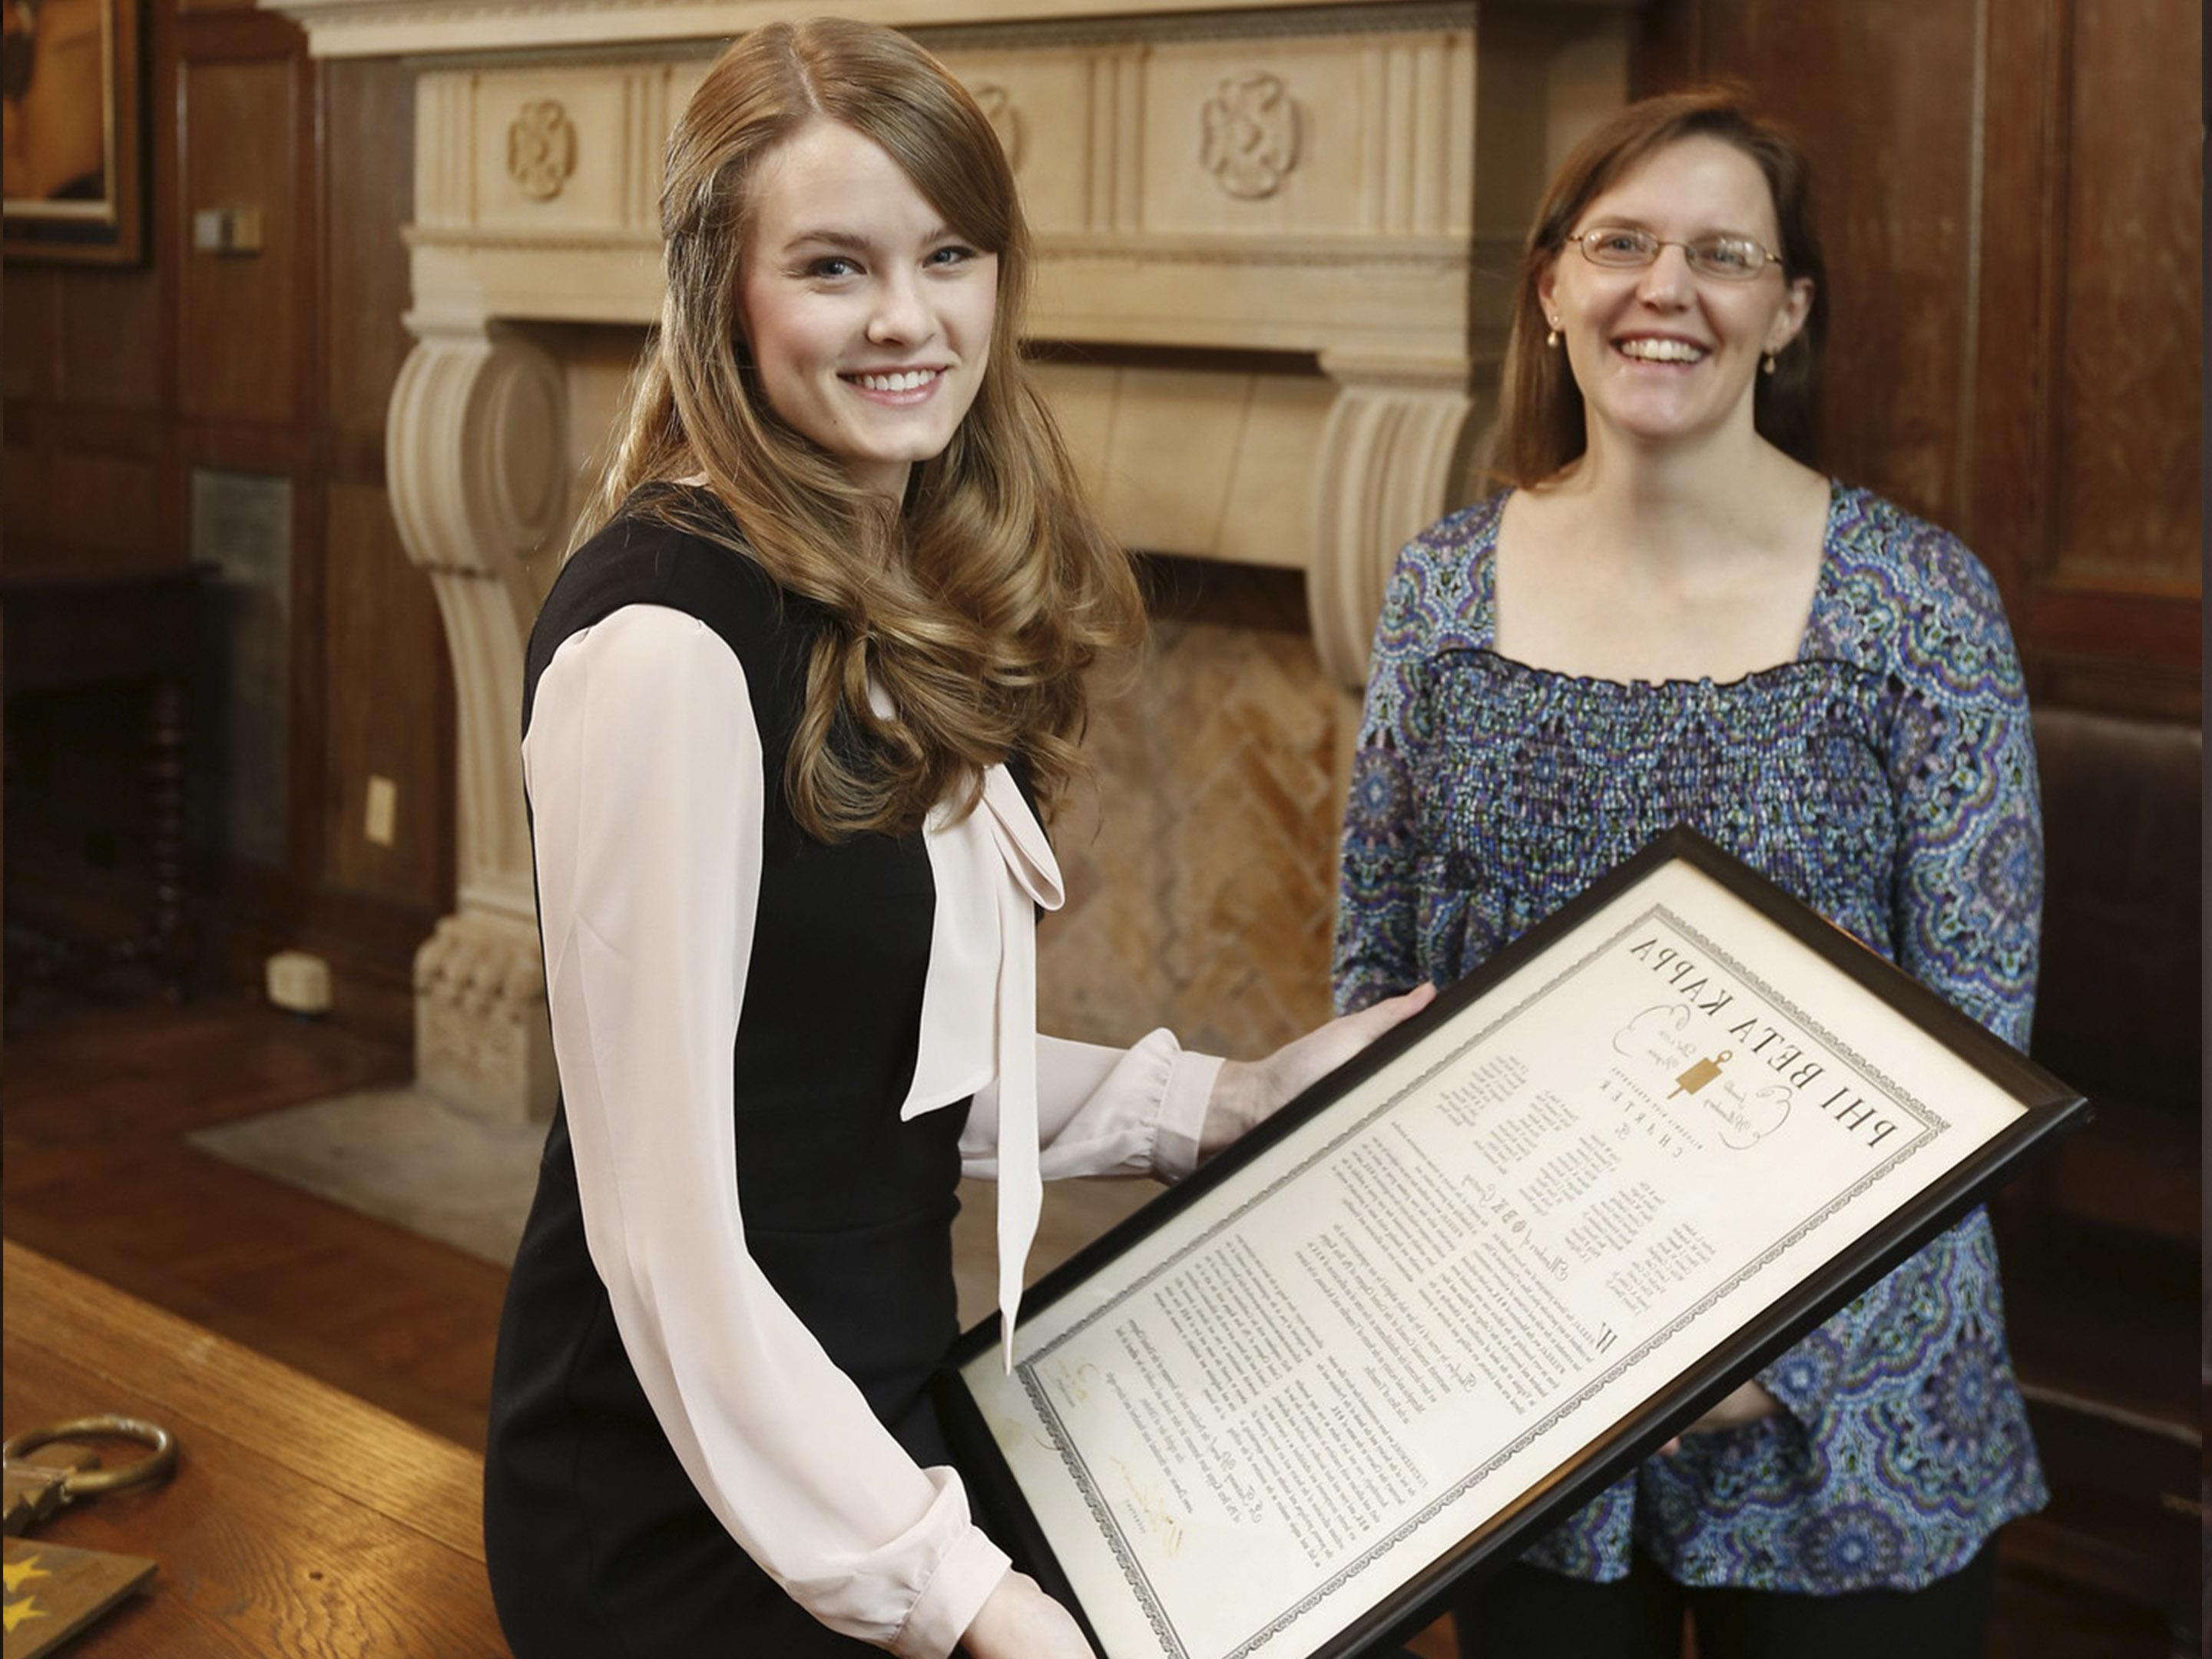 a student holds a Phi Beta Kappa certificate while a professor looks on